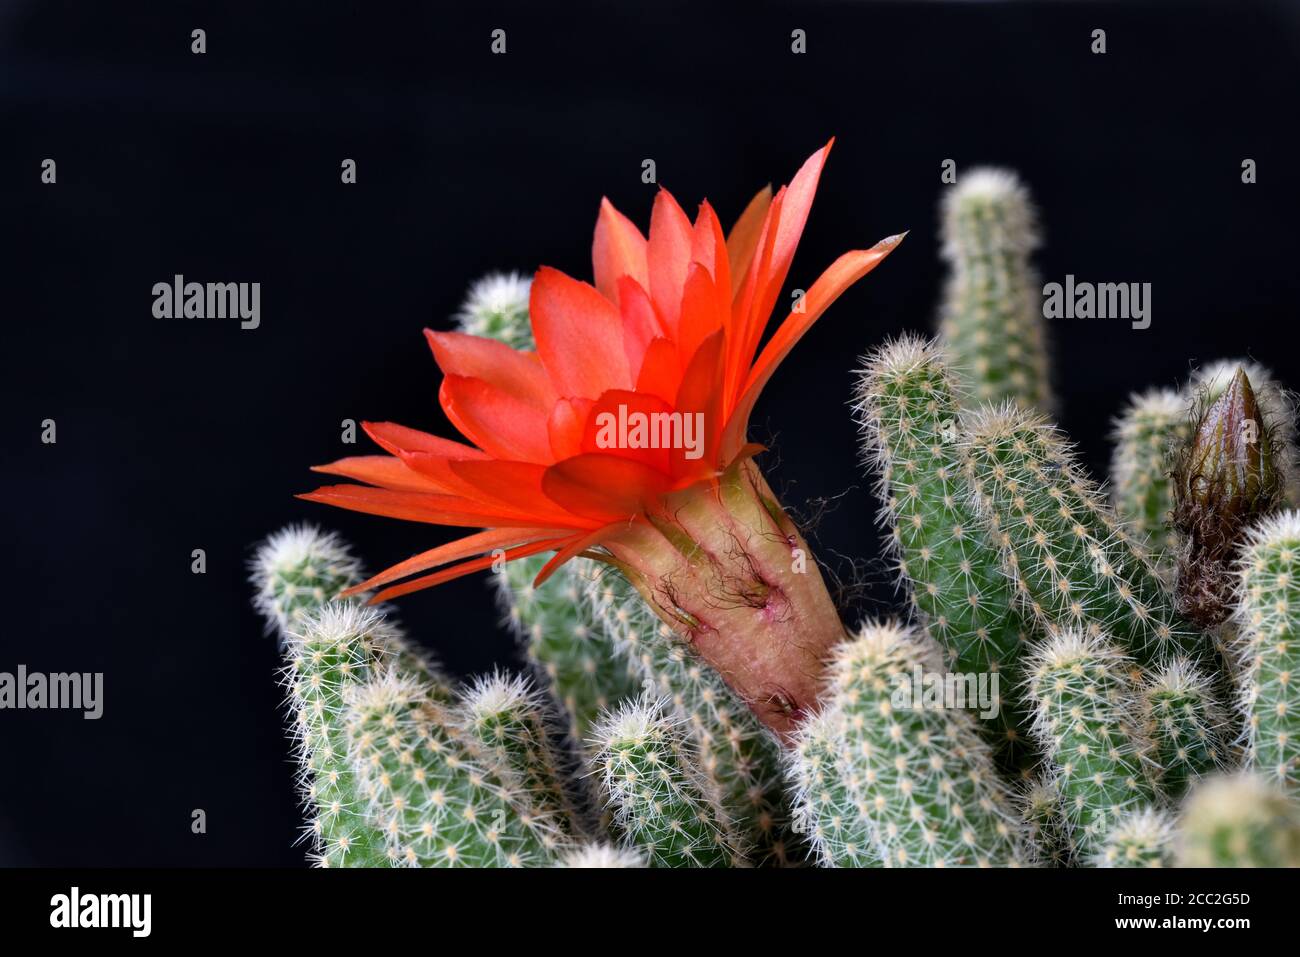 The fully opened flower of the Ladyfinger Cactus (Mammillaria sp)  in Southern England Stock Photo